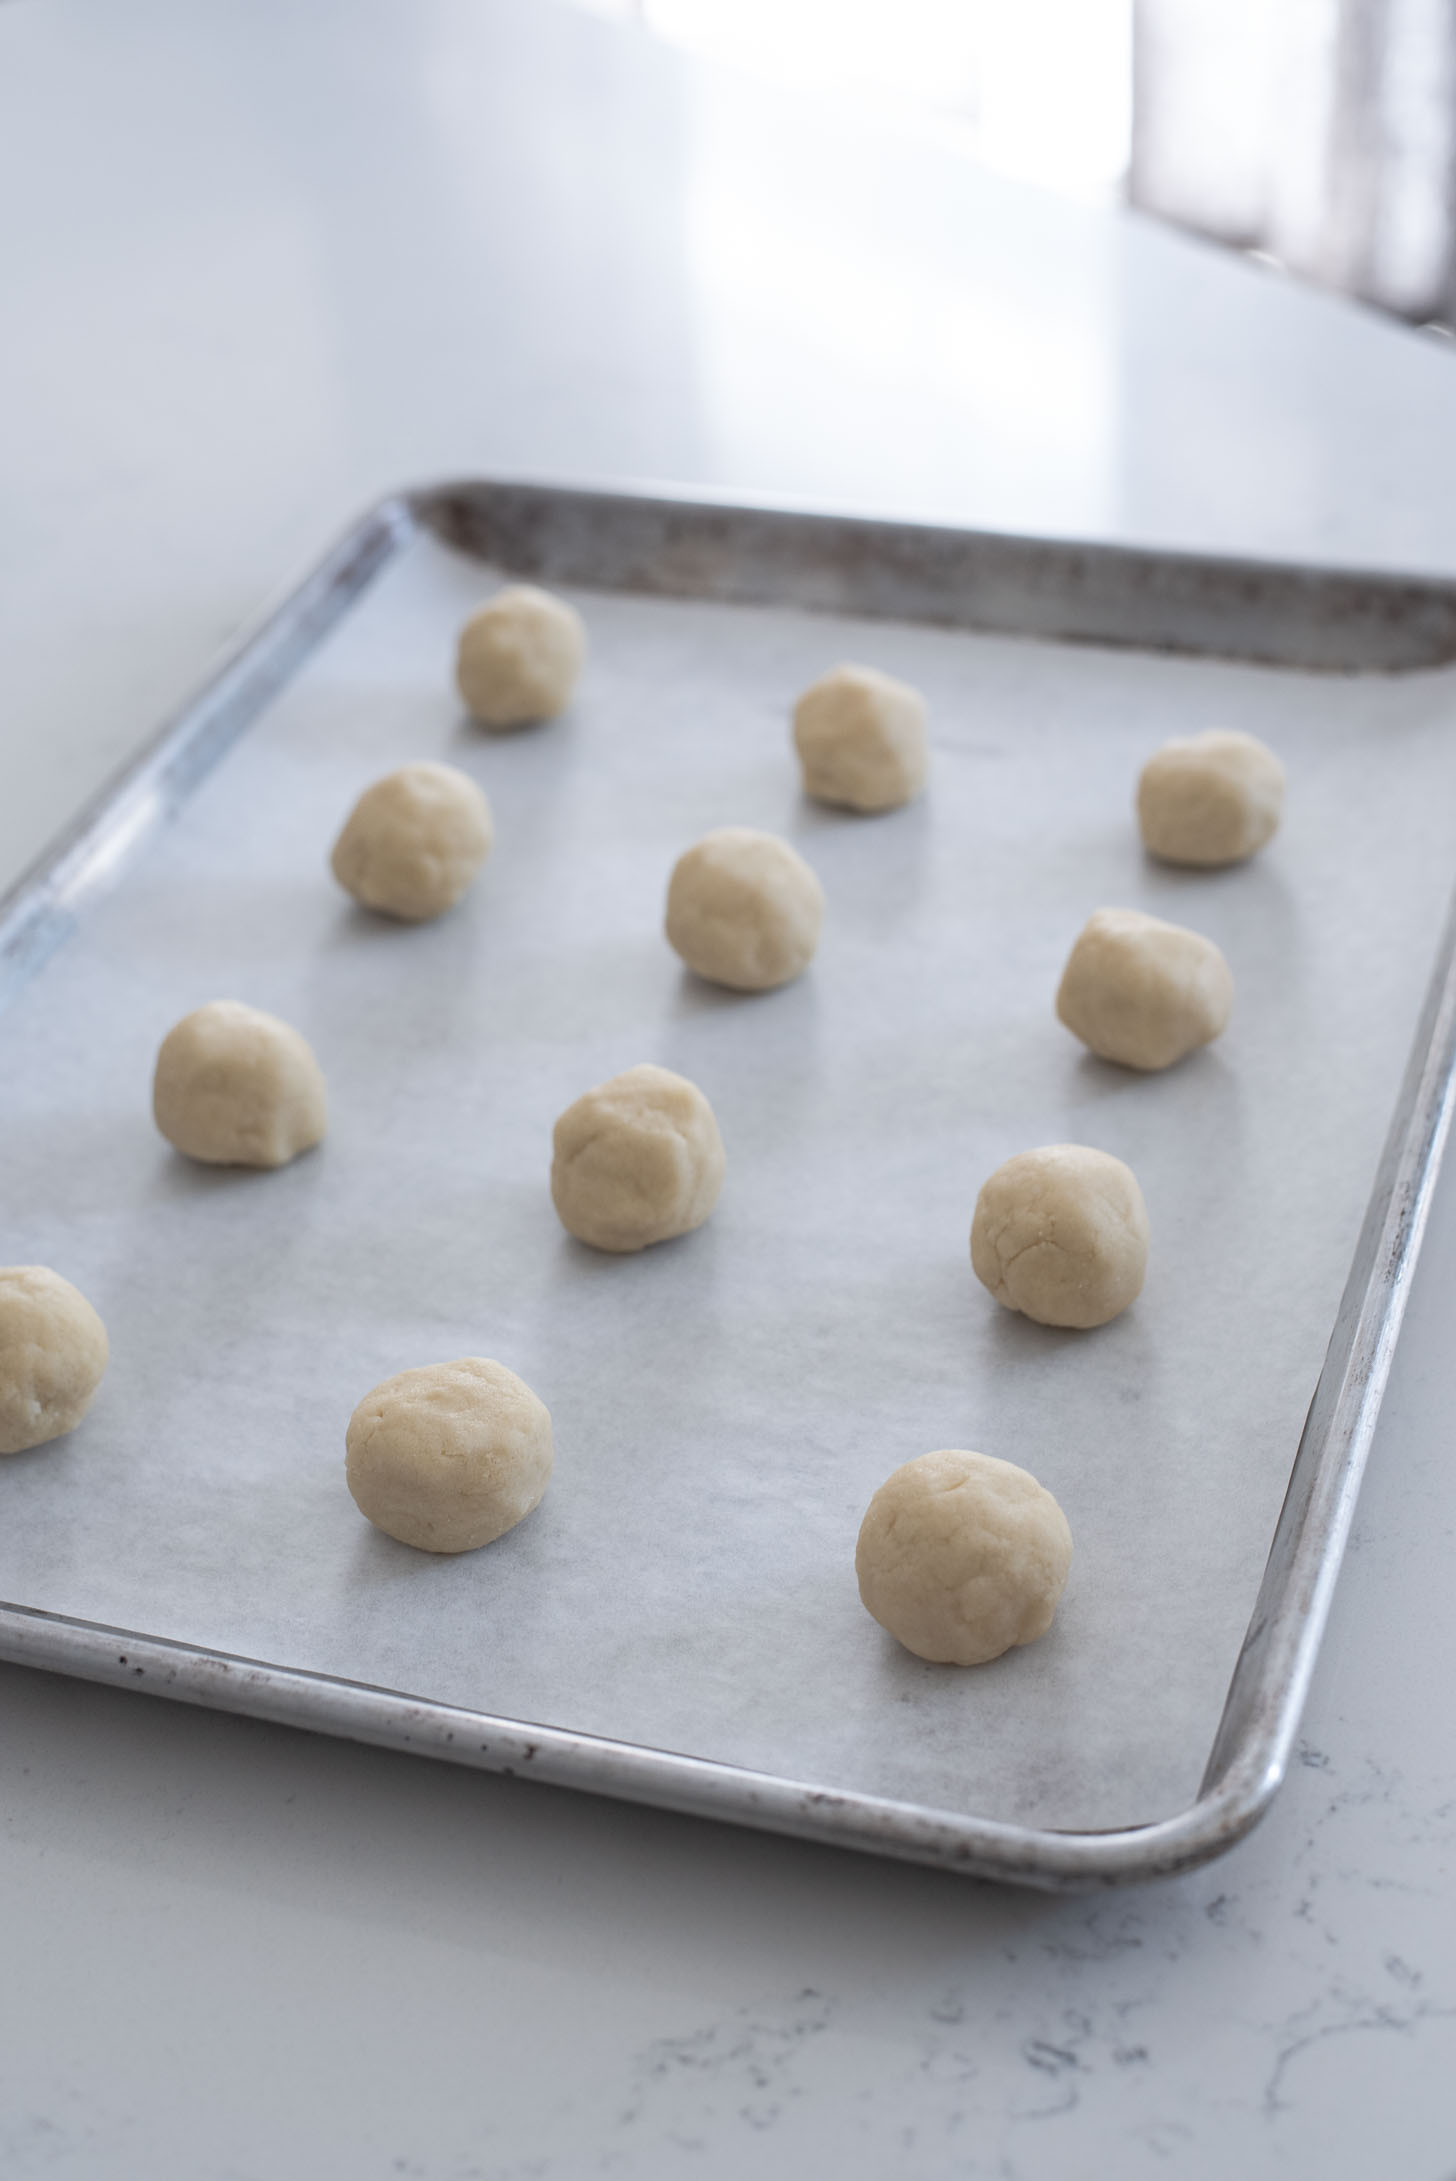 Arrange cookie dough balls on a cookie sheet lined with a parchment paper.